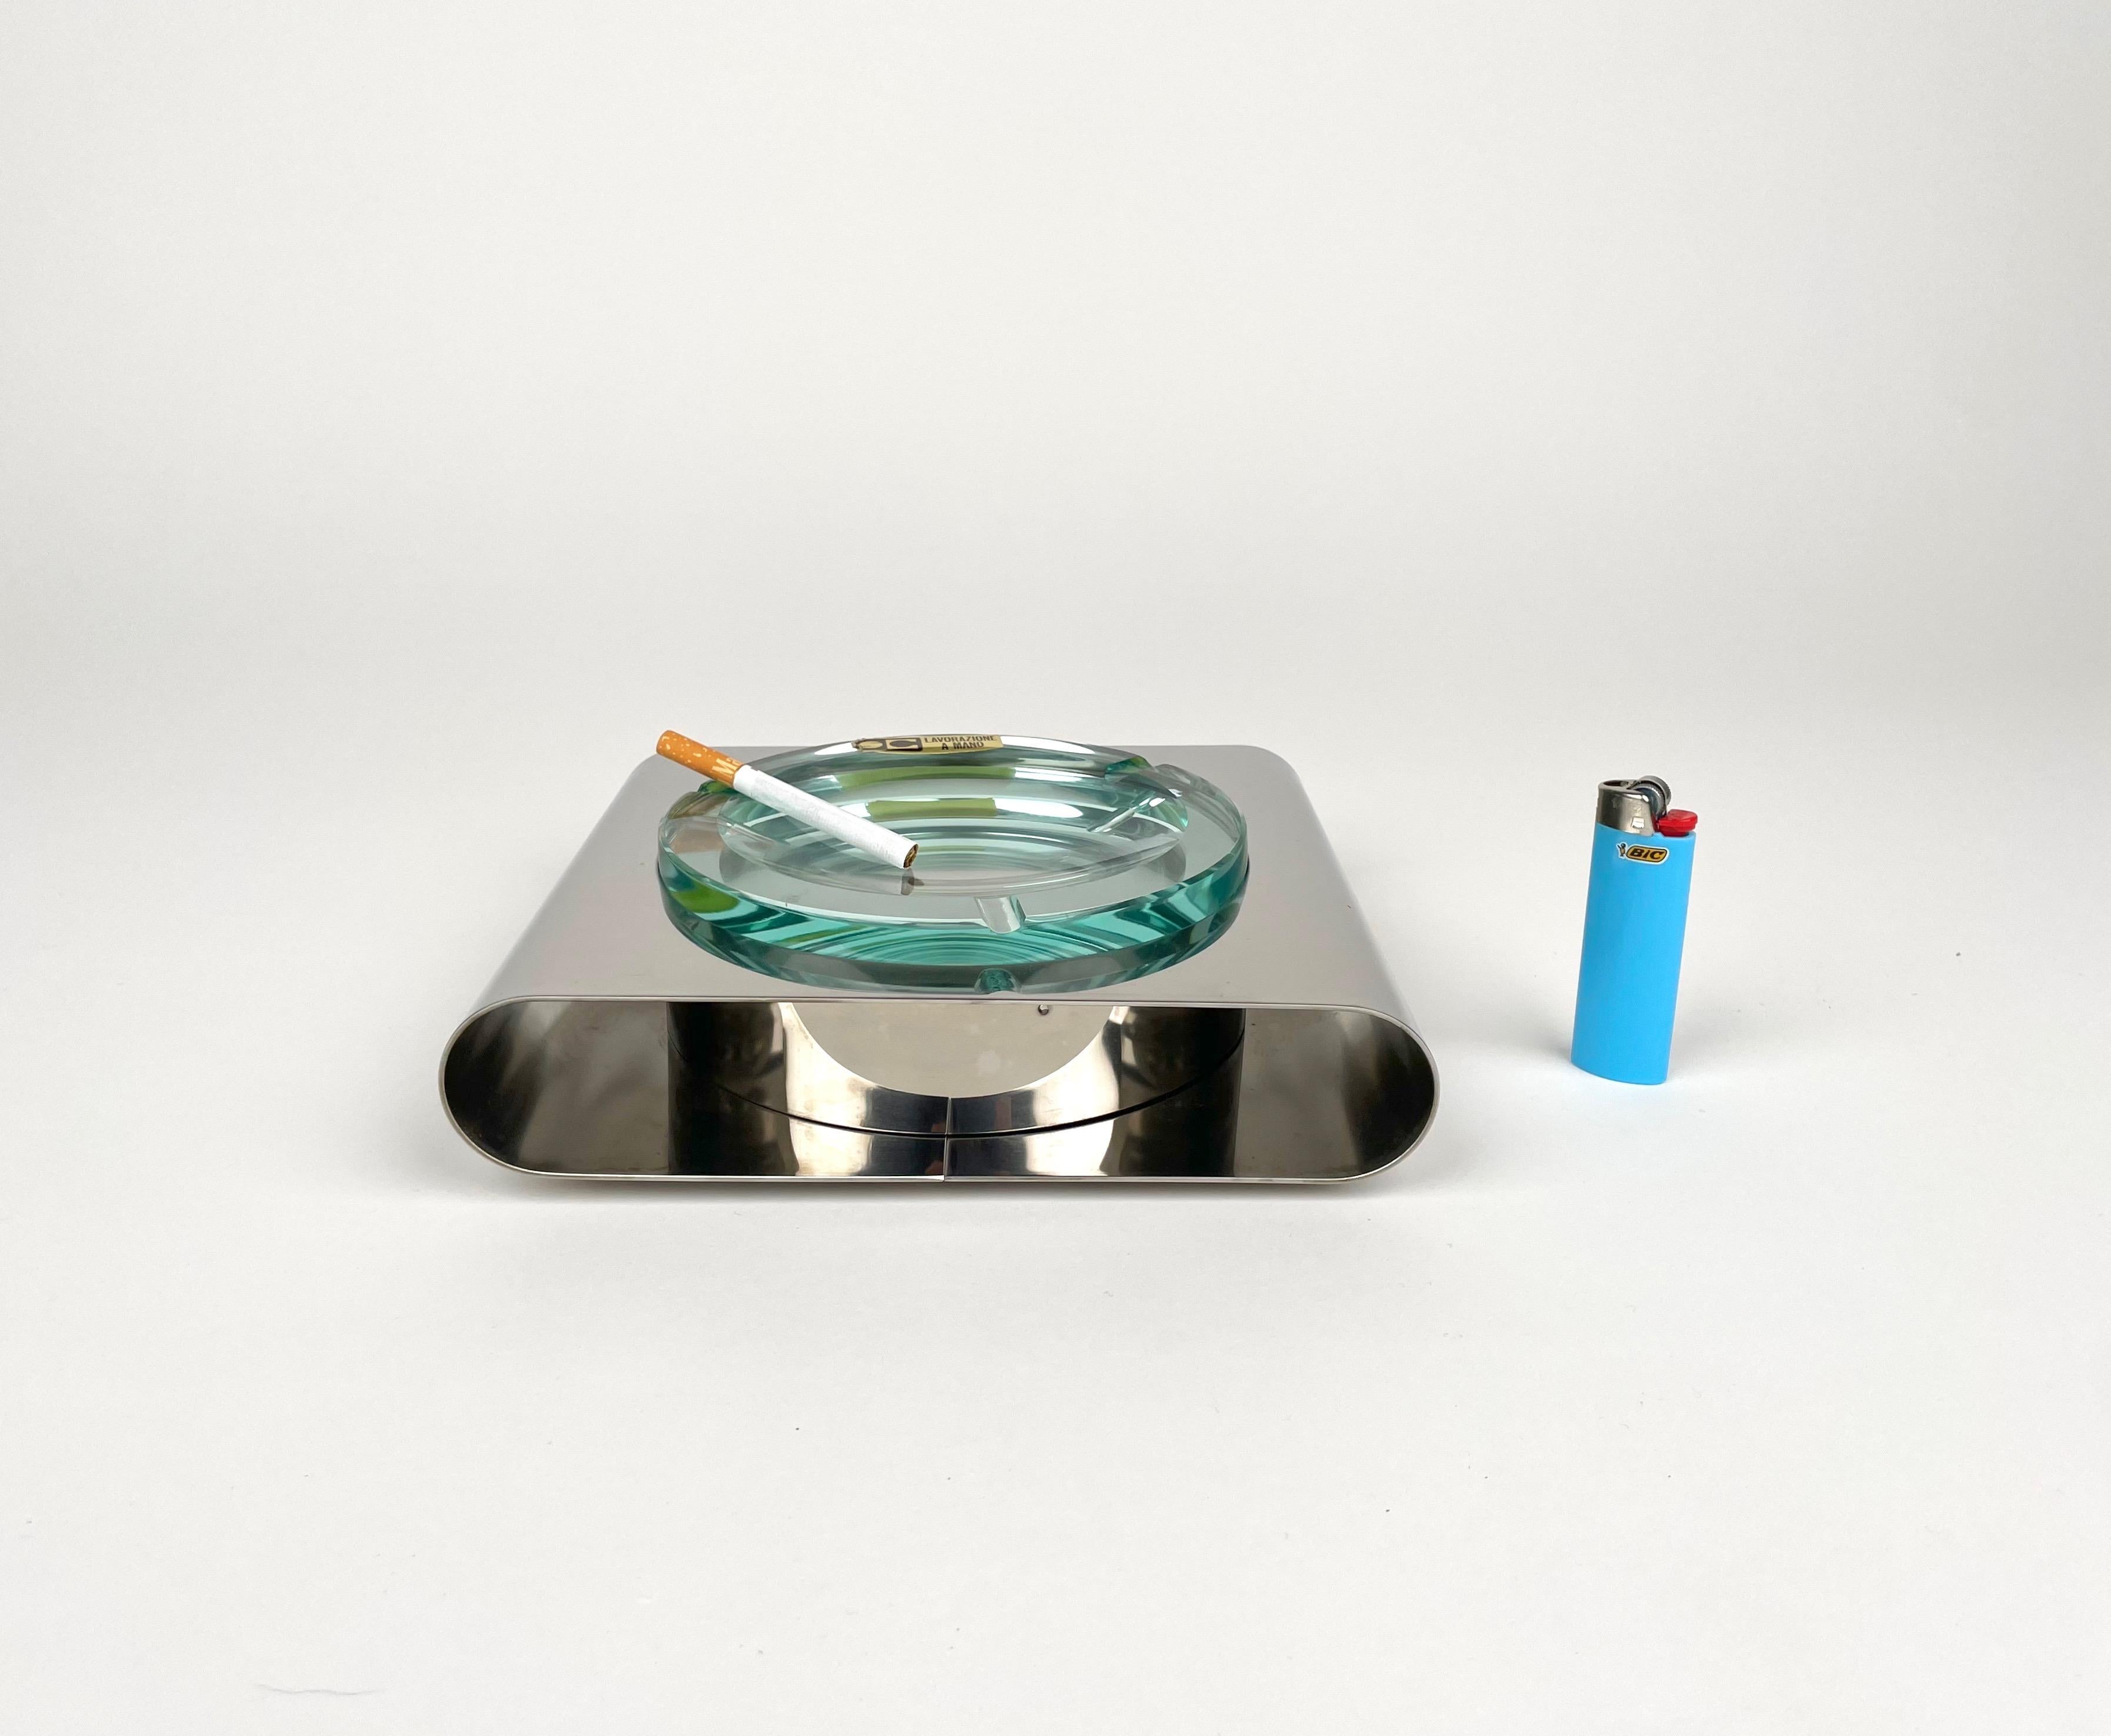 Ashtray Sena Cristal Steel and Green Glass, Italy, 1970s For Sale 5